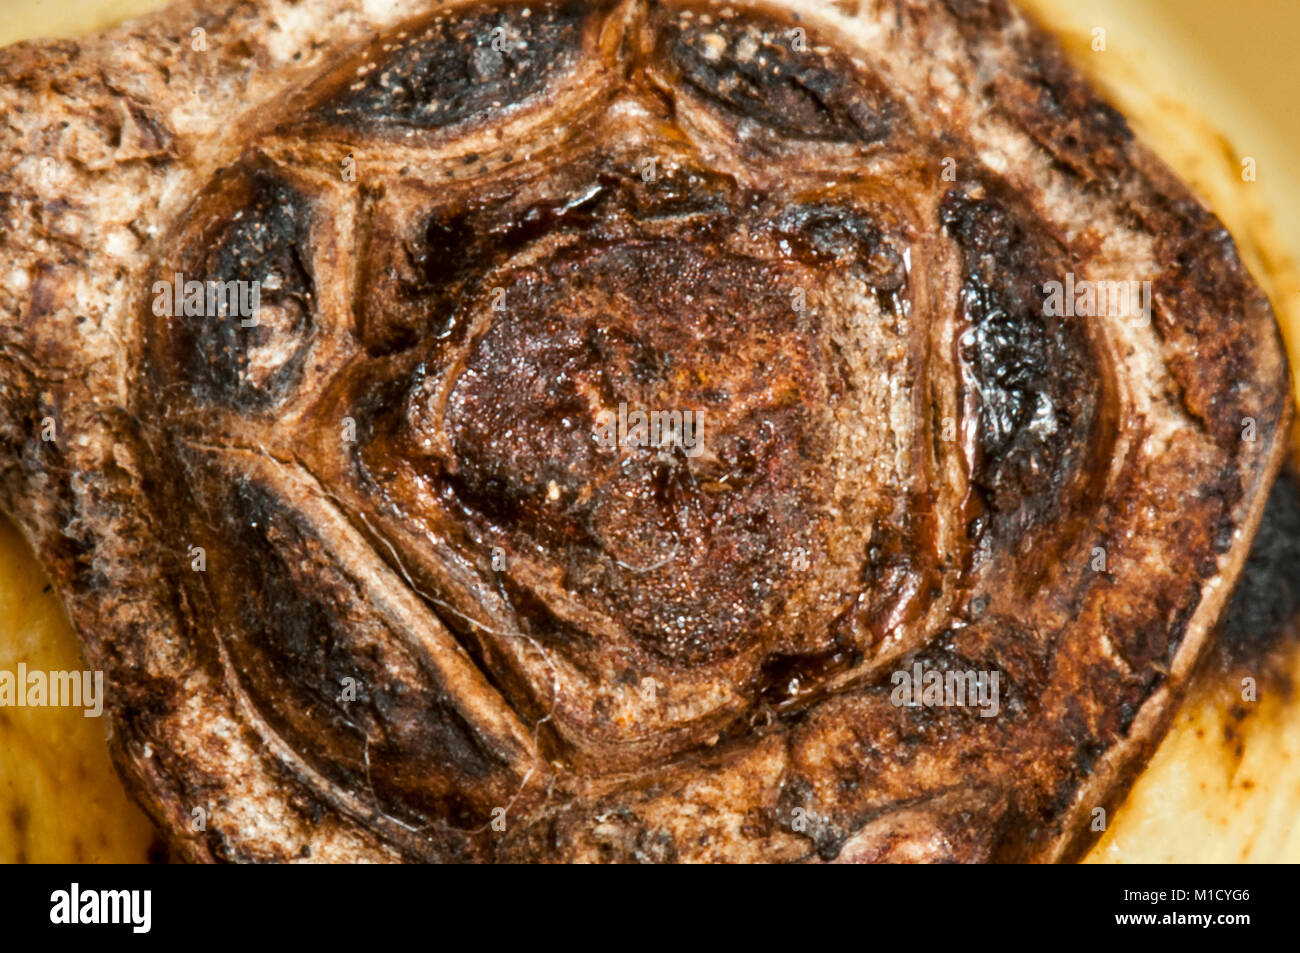 A frame filling Macro image of the end of a banana. 24 December 2014. Stock Photo